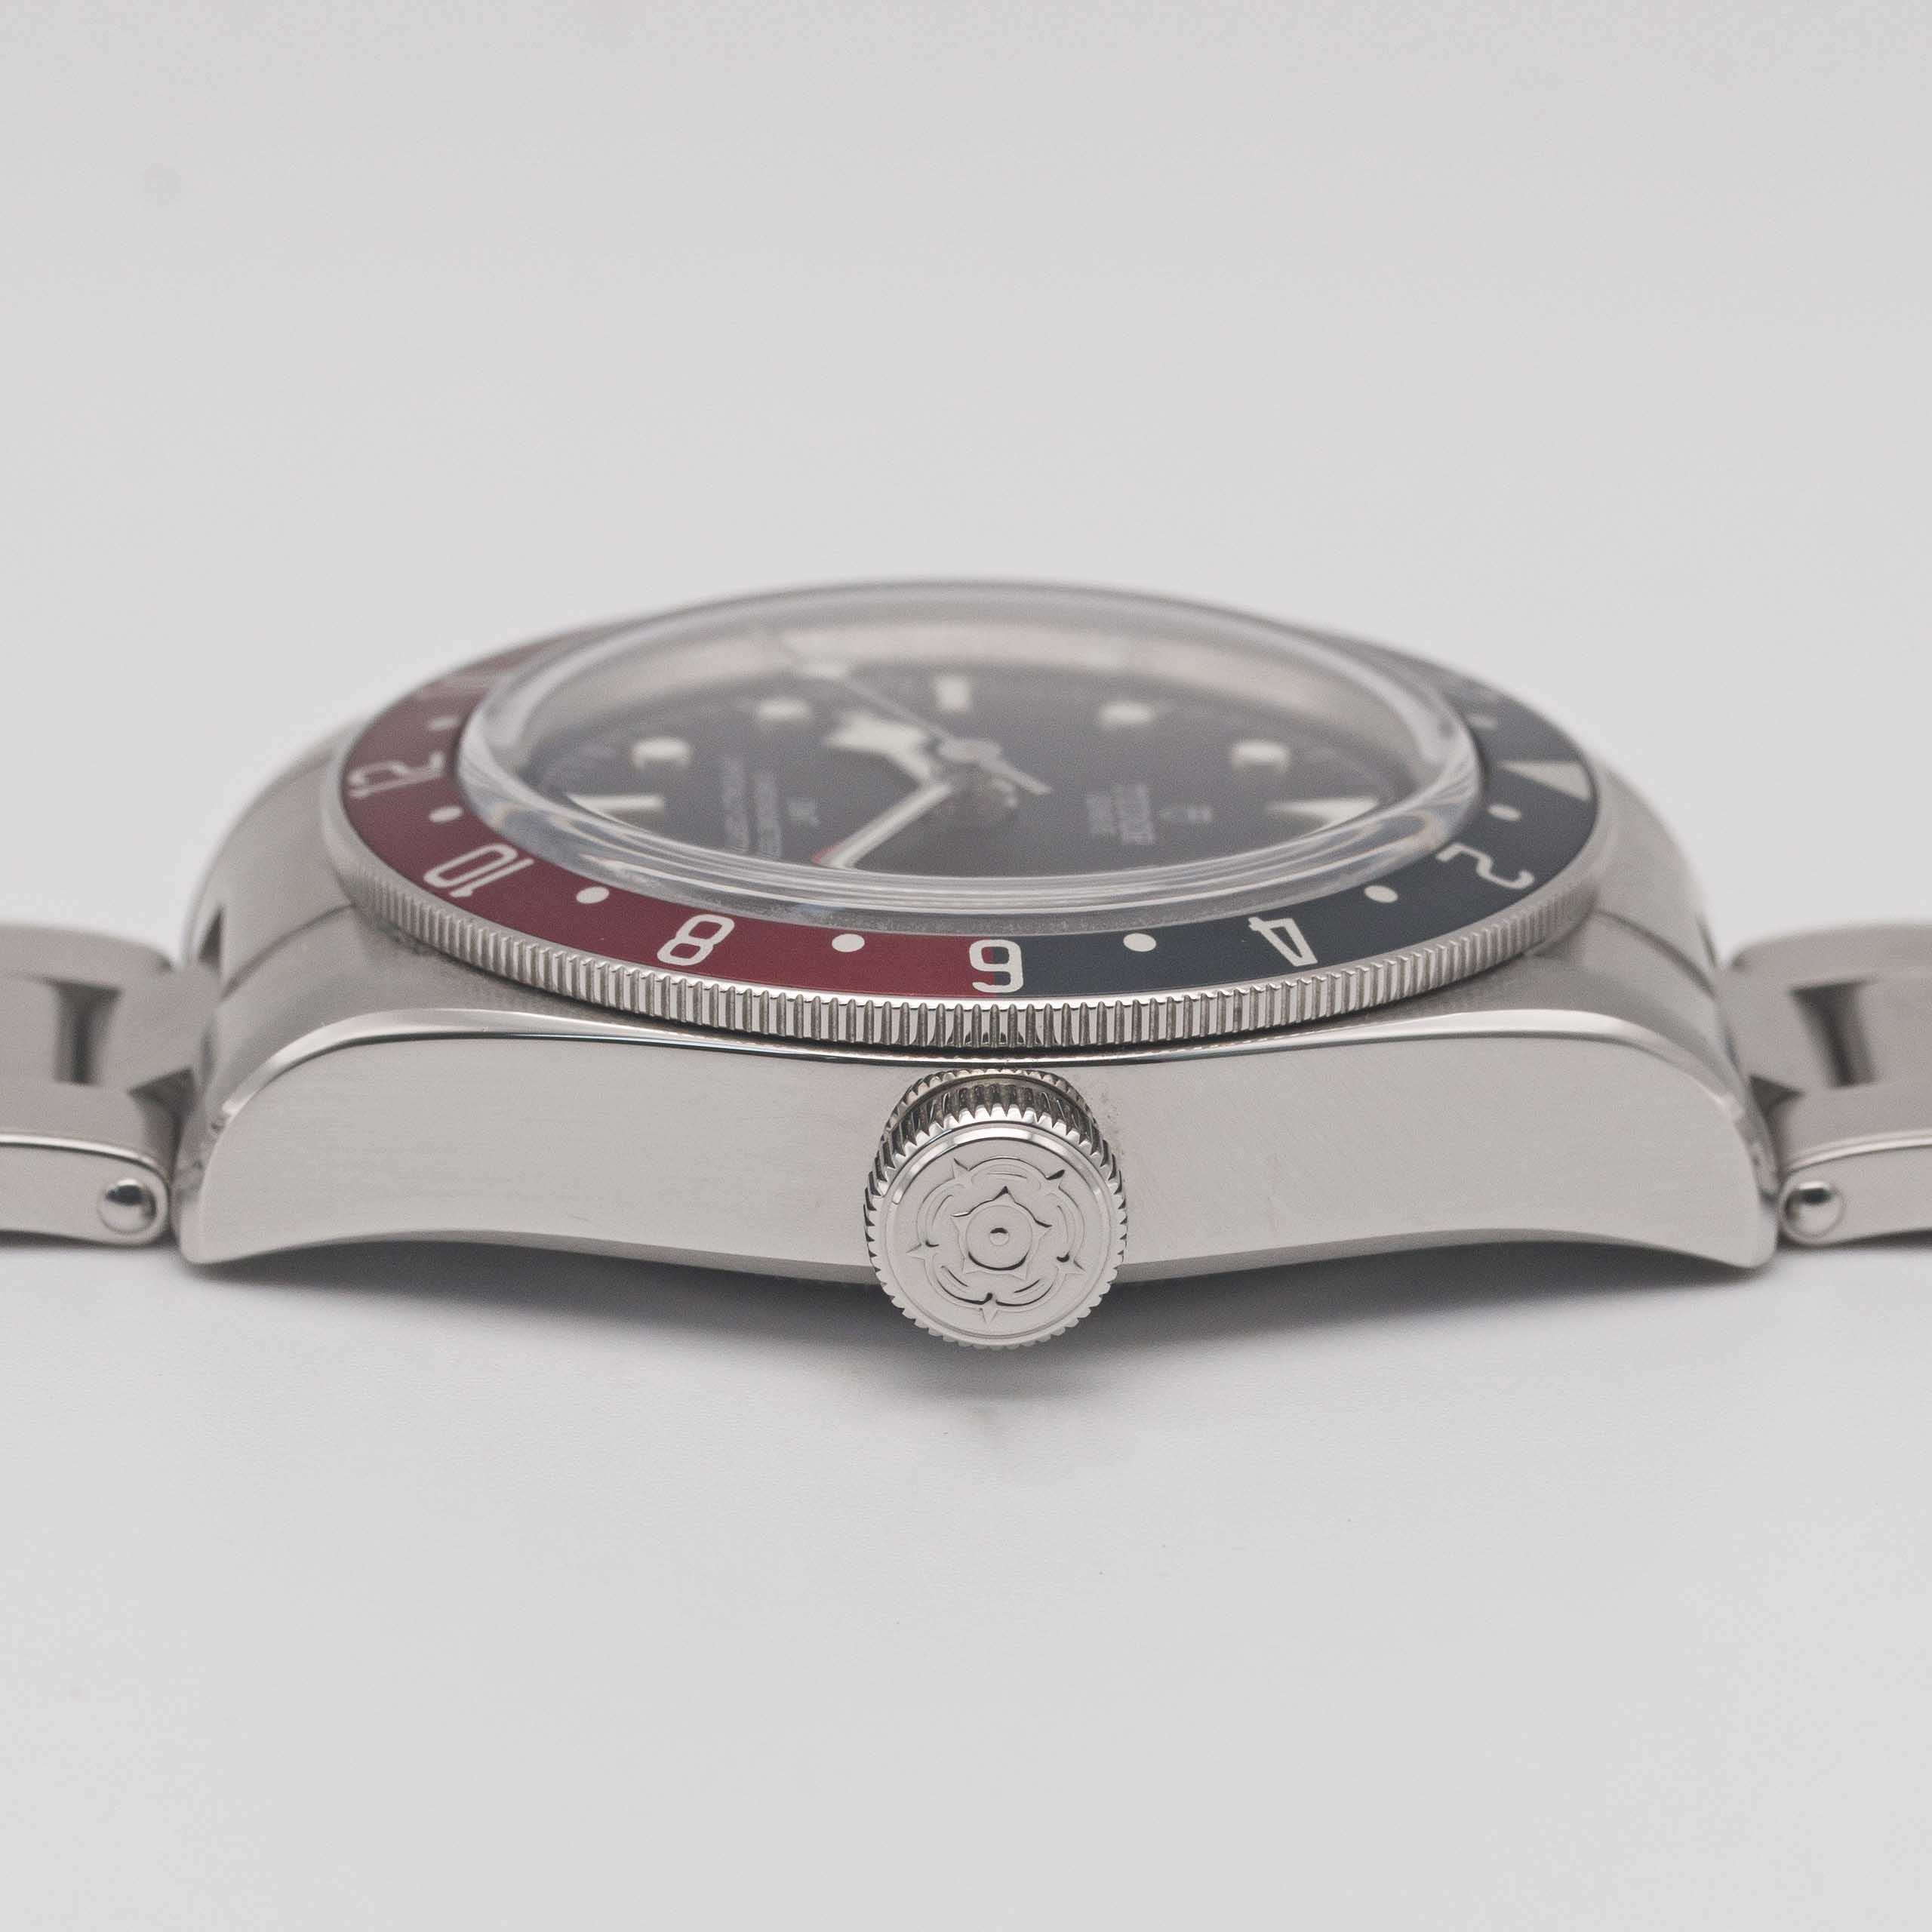 A GENTLEMAN'S STAINLESS STEEL ROLEX TUDOR GMT SELF WINDING BRACELET WATCH DATED 2018, REF. 79830RB - Image 7 of 11